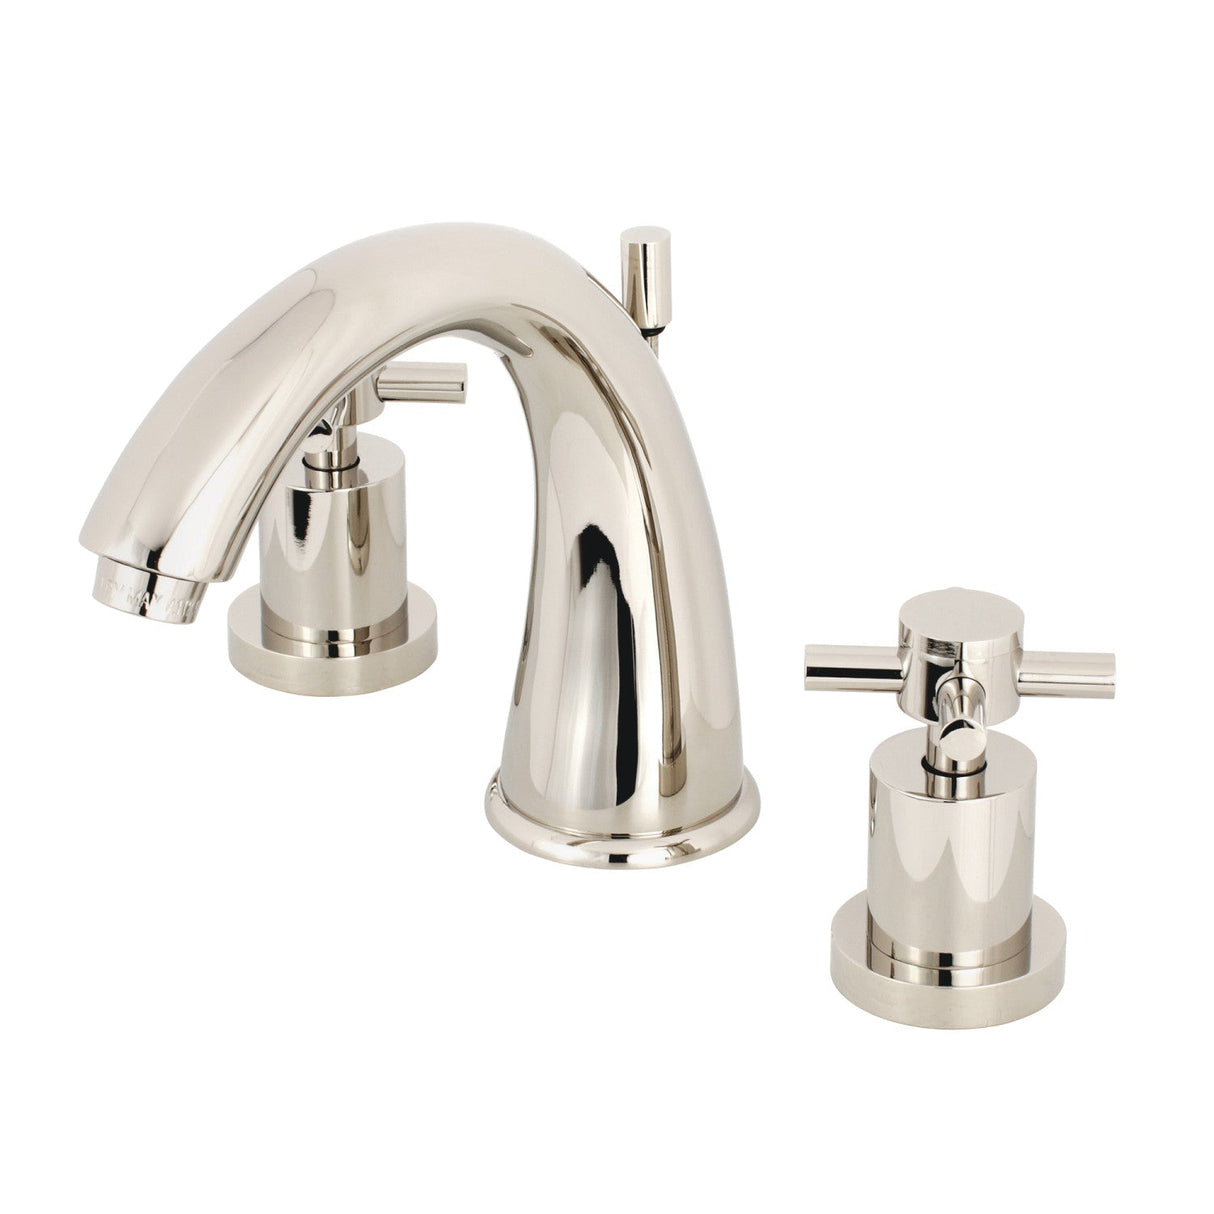 Concord KS2966DX Two-Handle 3-Hole Deck Mount Widespread Bathroom Faucet with Brass Pop-Up, Polished Nickel